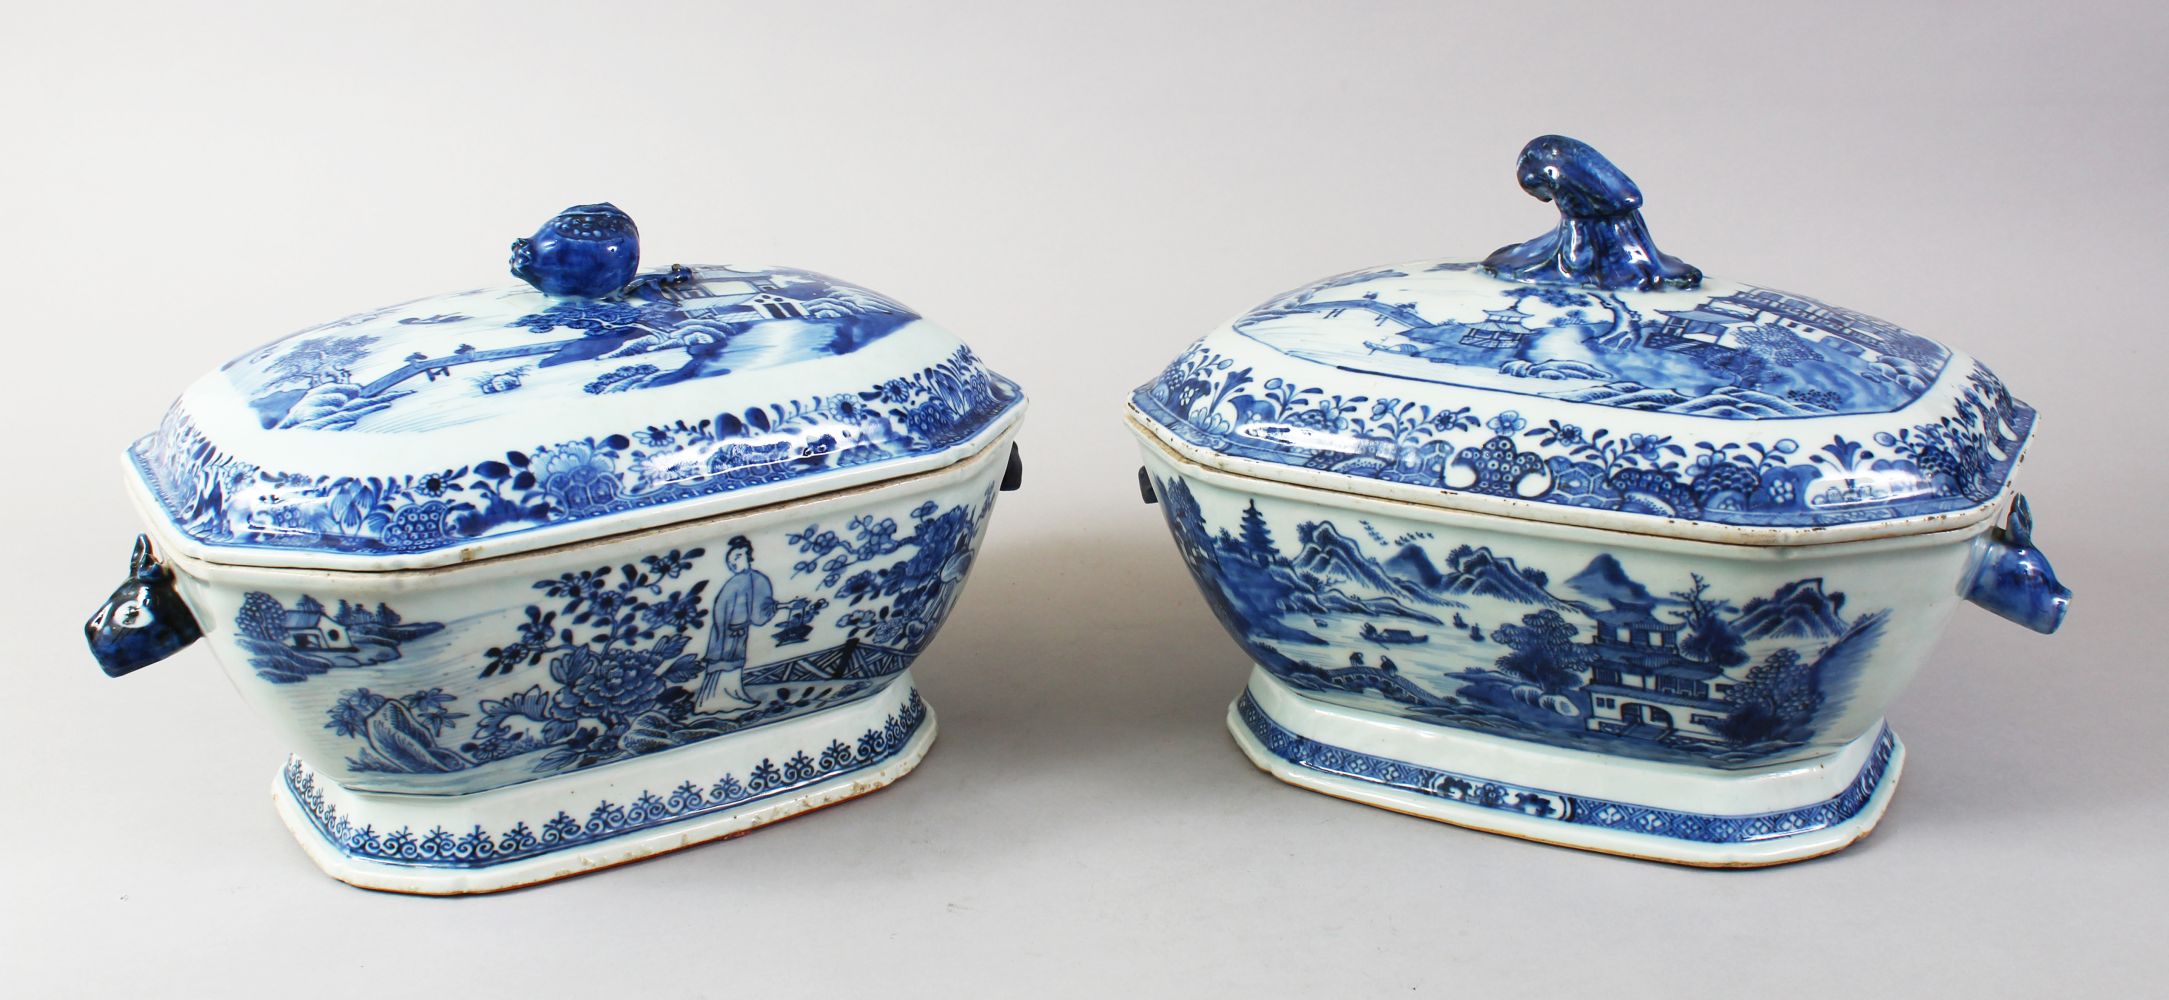 TWO 19TH CENTURY CHINESE BLUE & WHITE PORCELAIN TUREENS AND COVERS, painted with fisherman and a